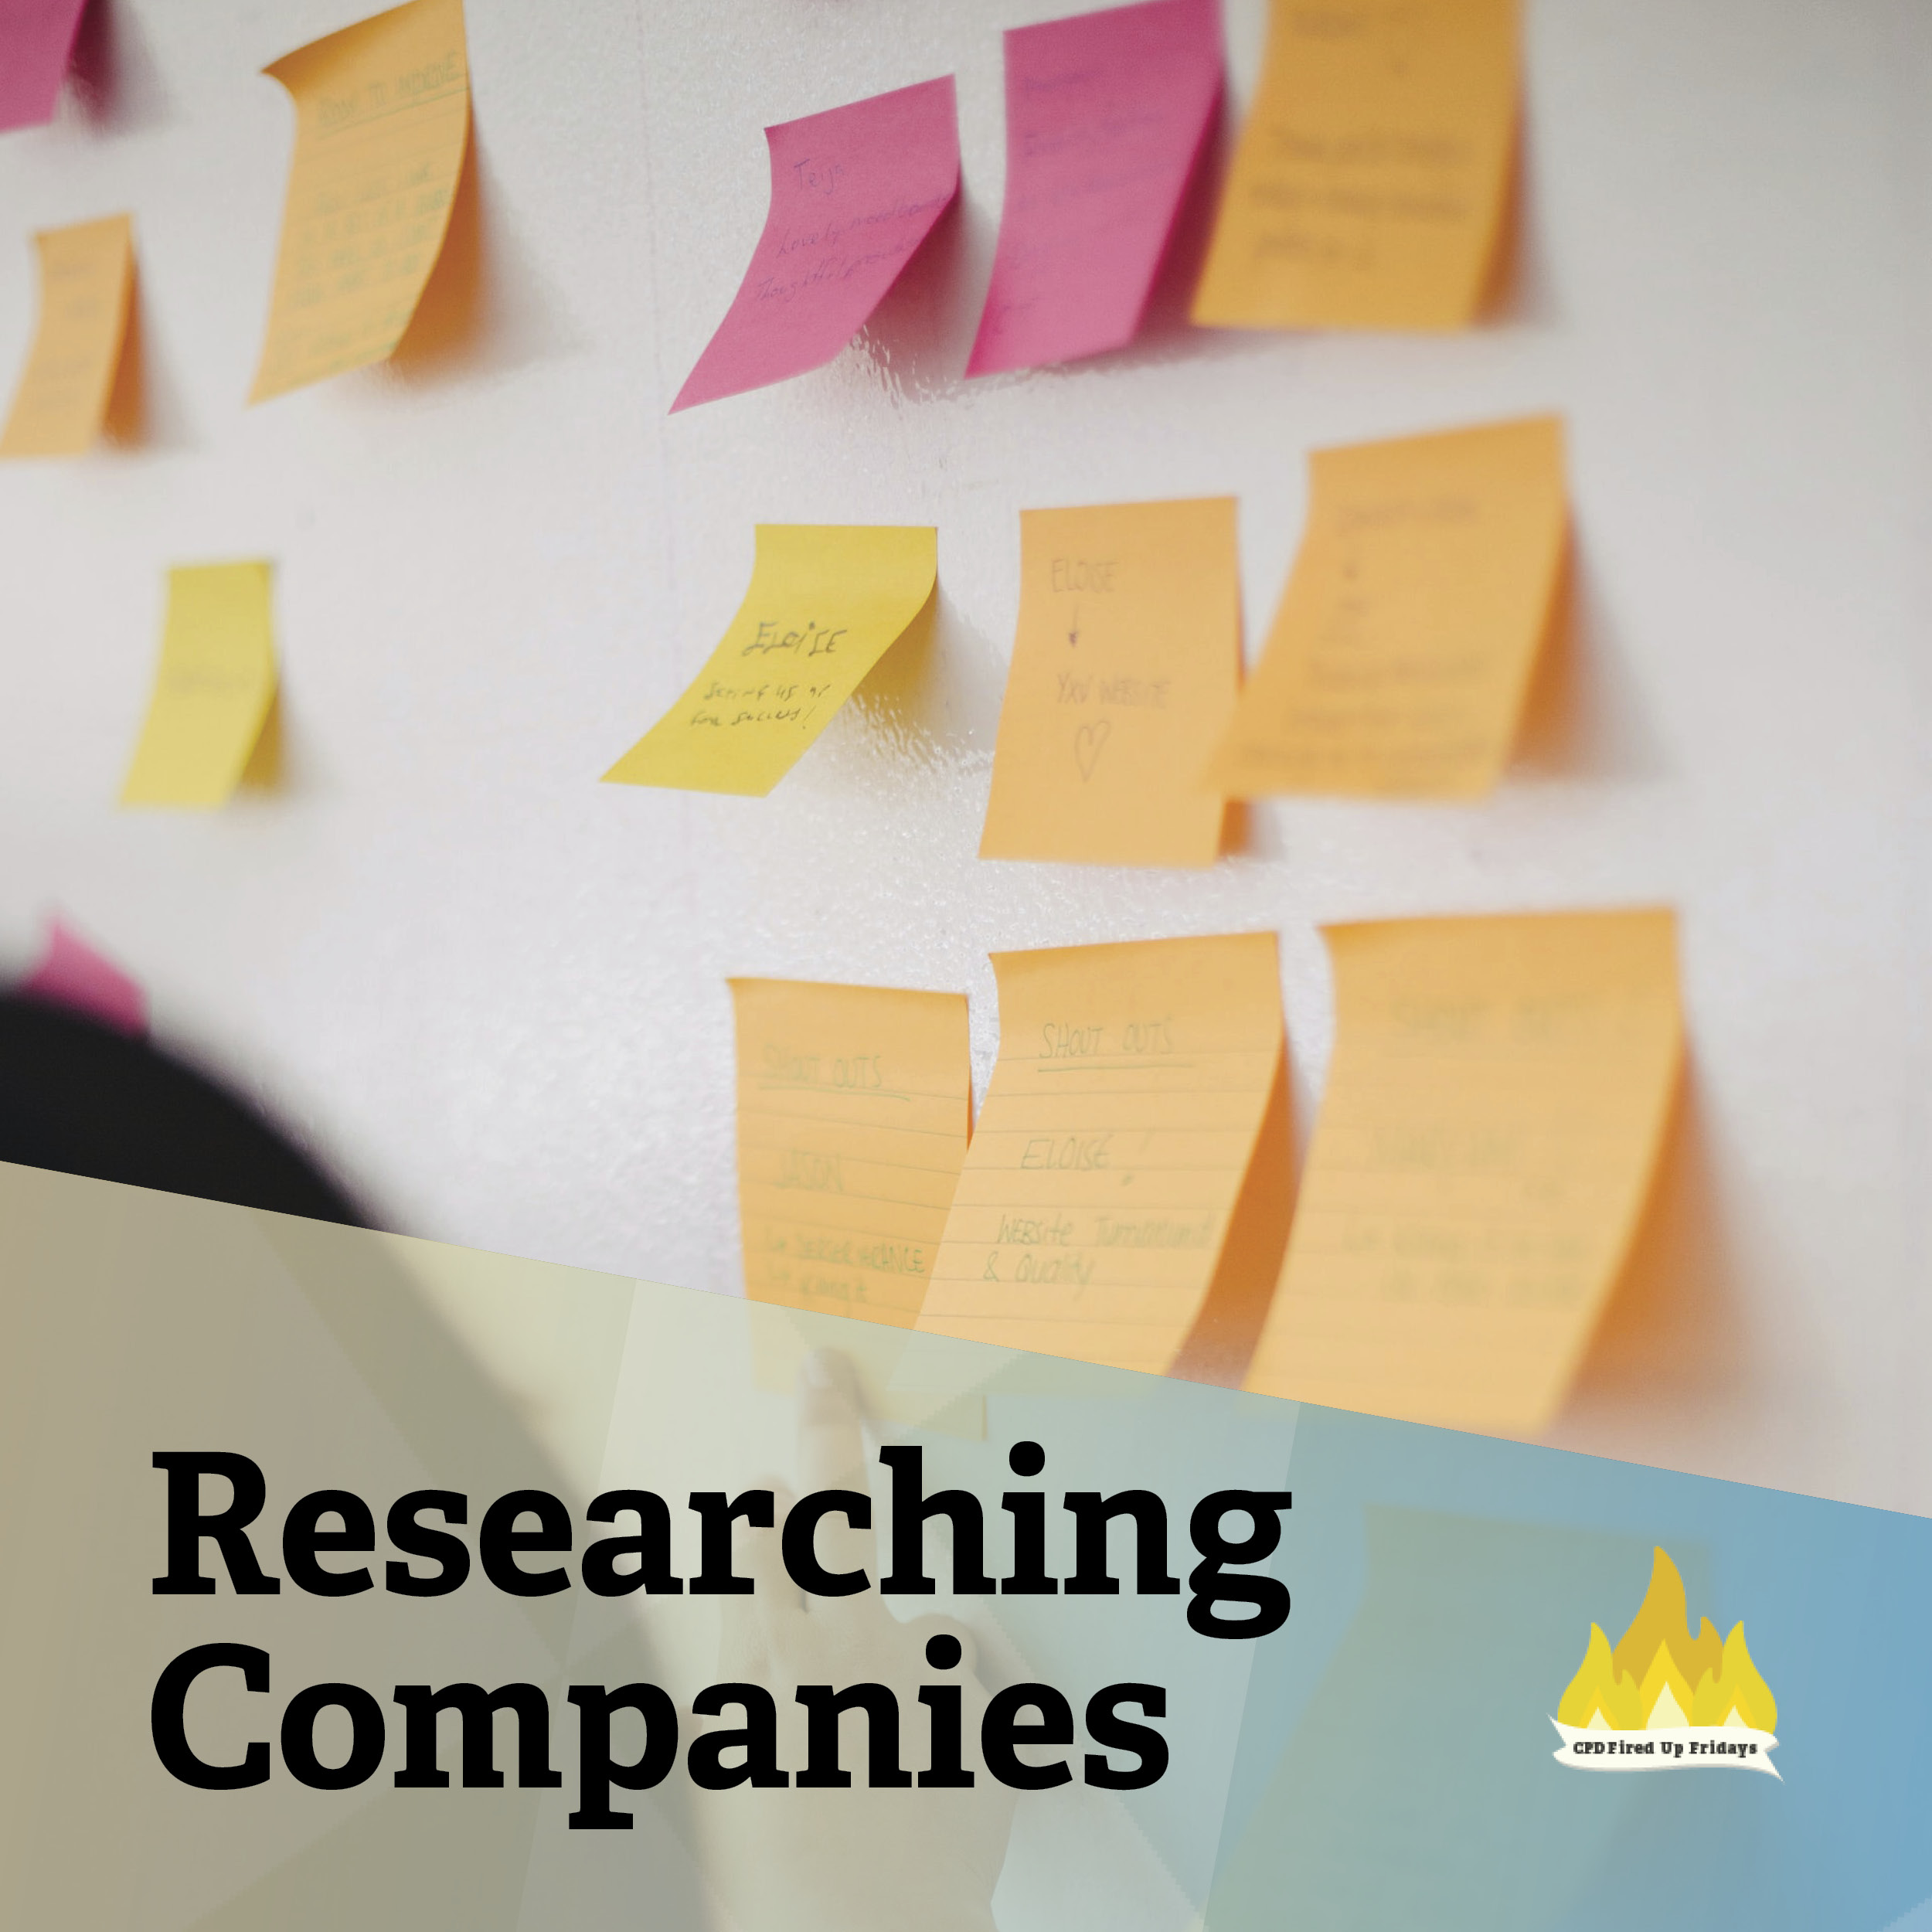 Brightly colored post-it are stuck in rows on a white wall, with writing (not legible) on each one. The text below reads: 'Researching Companies'